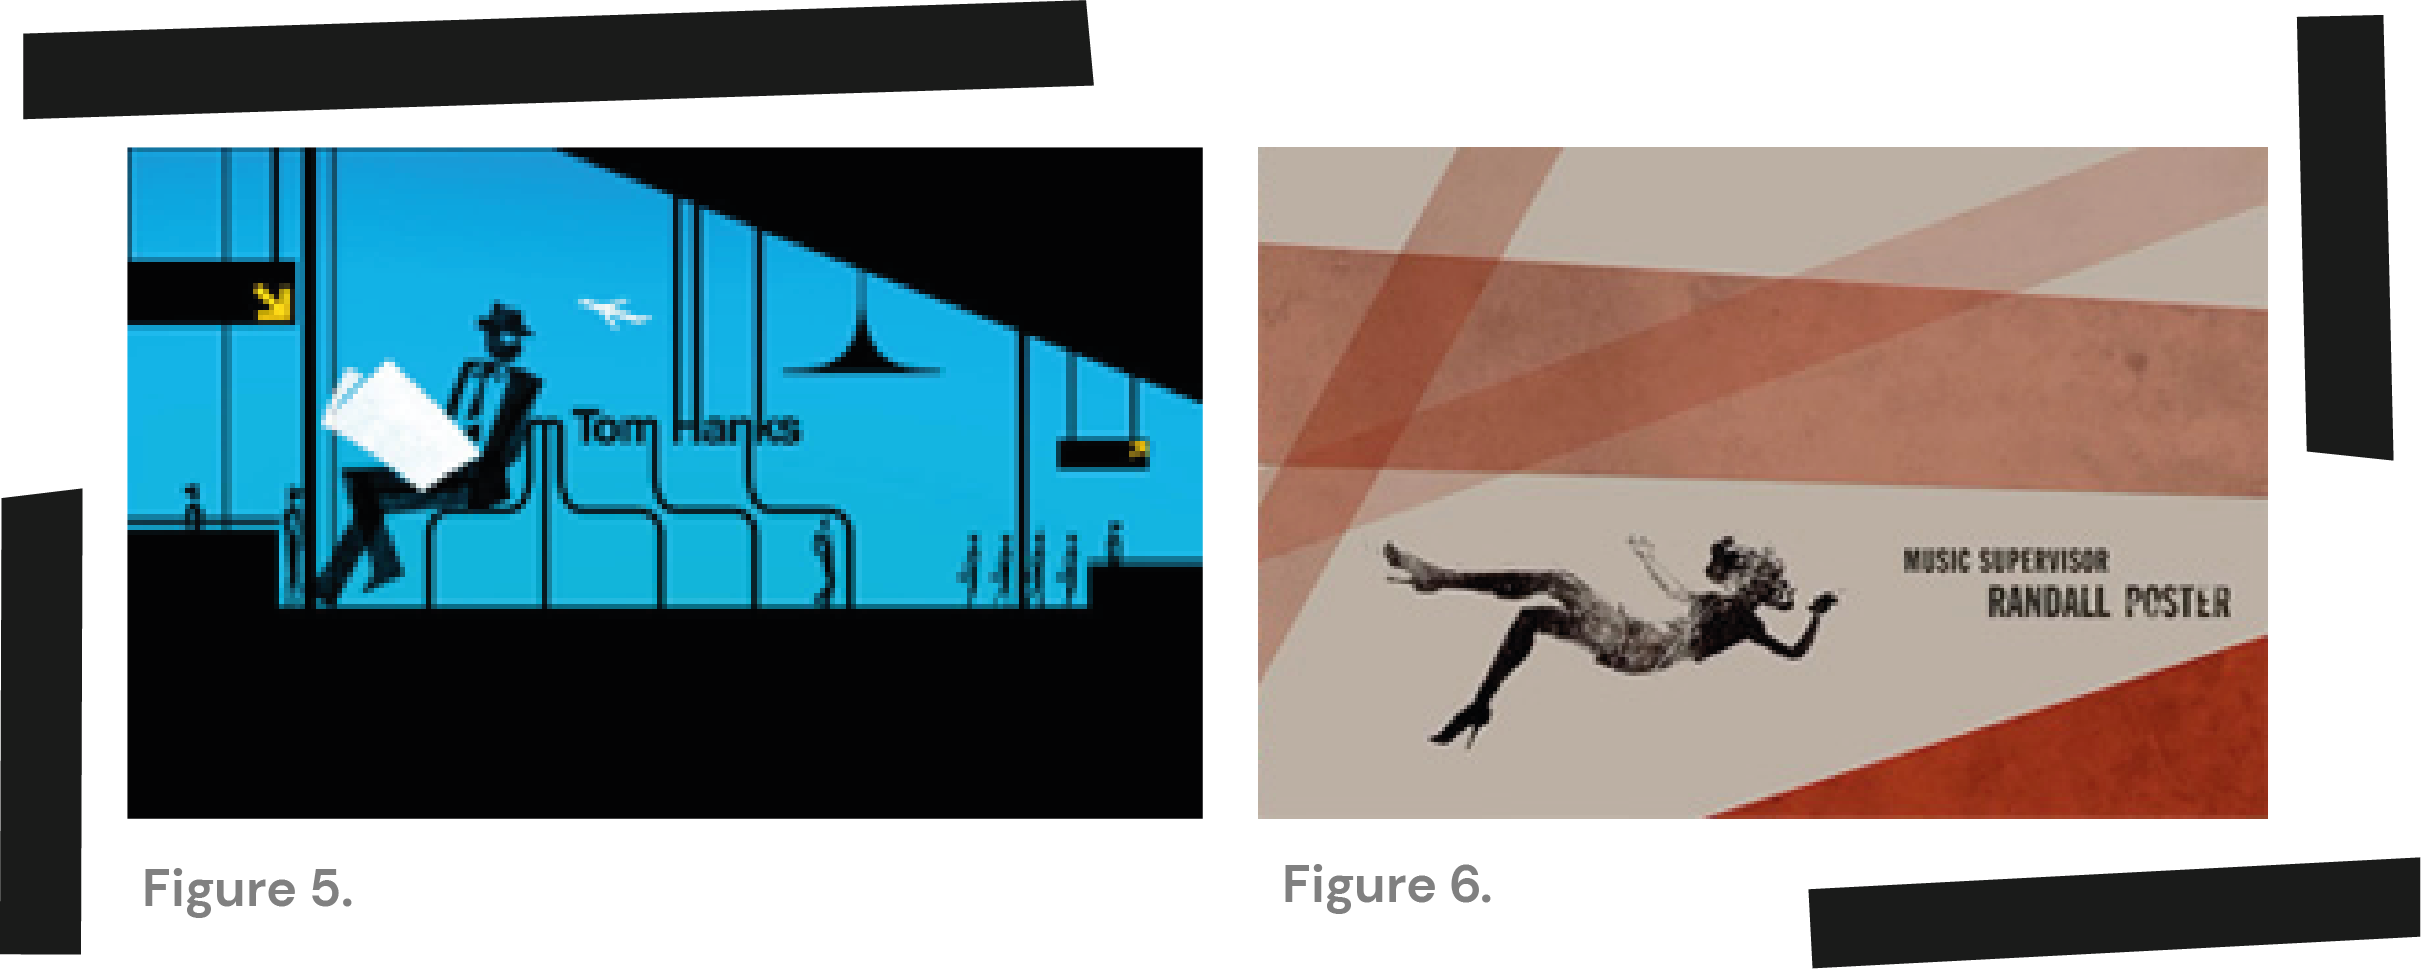 Images from title sequences influenced by Saul Bass